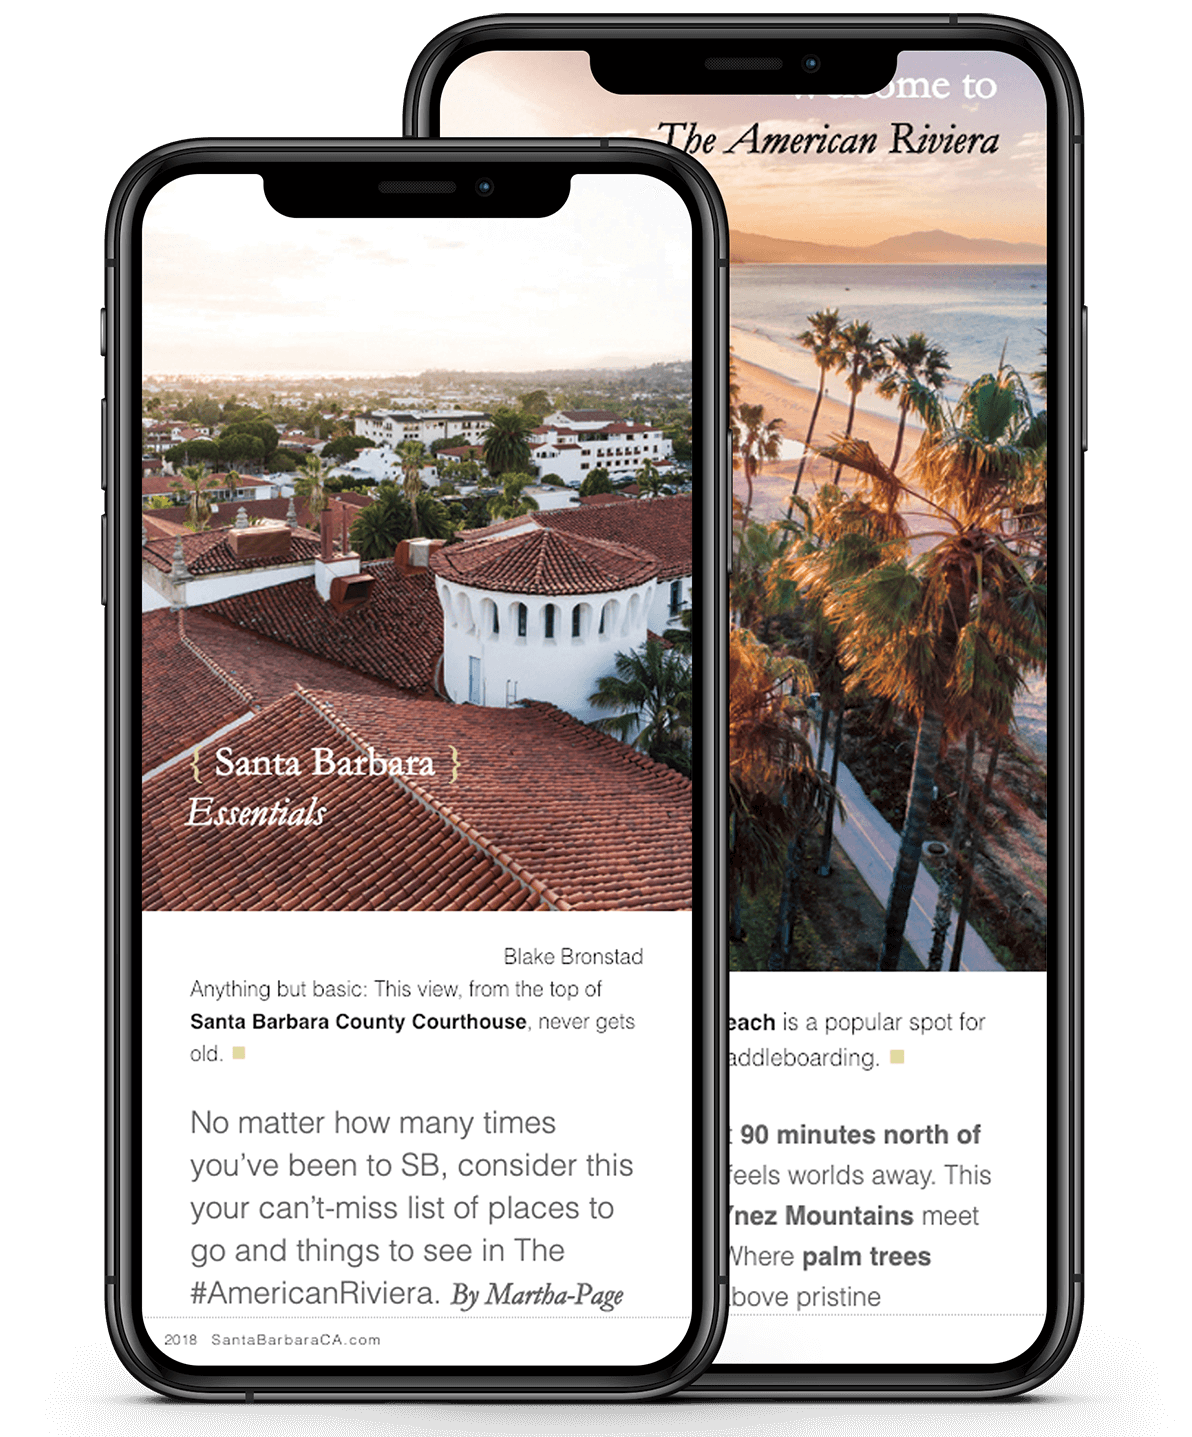 A travel magazine created in PageRaft and shown on an iPhone